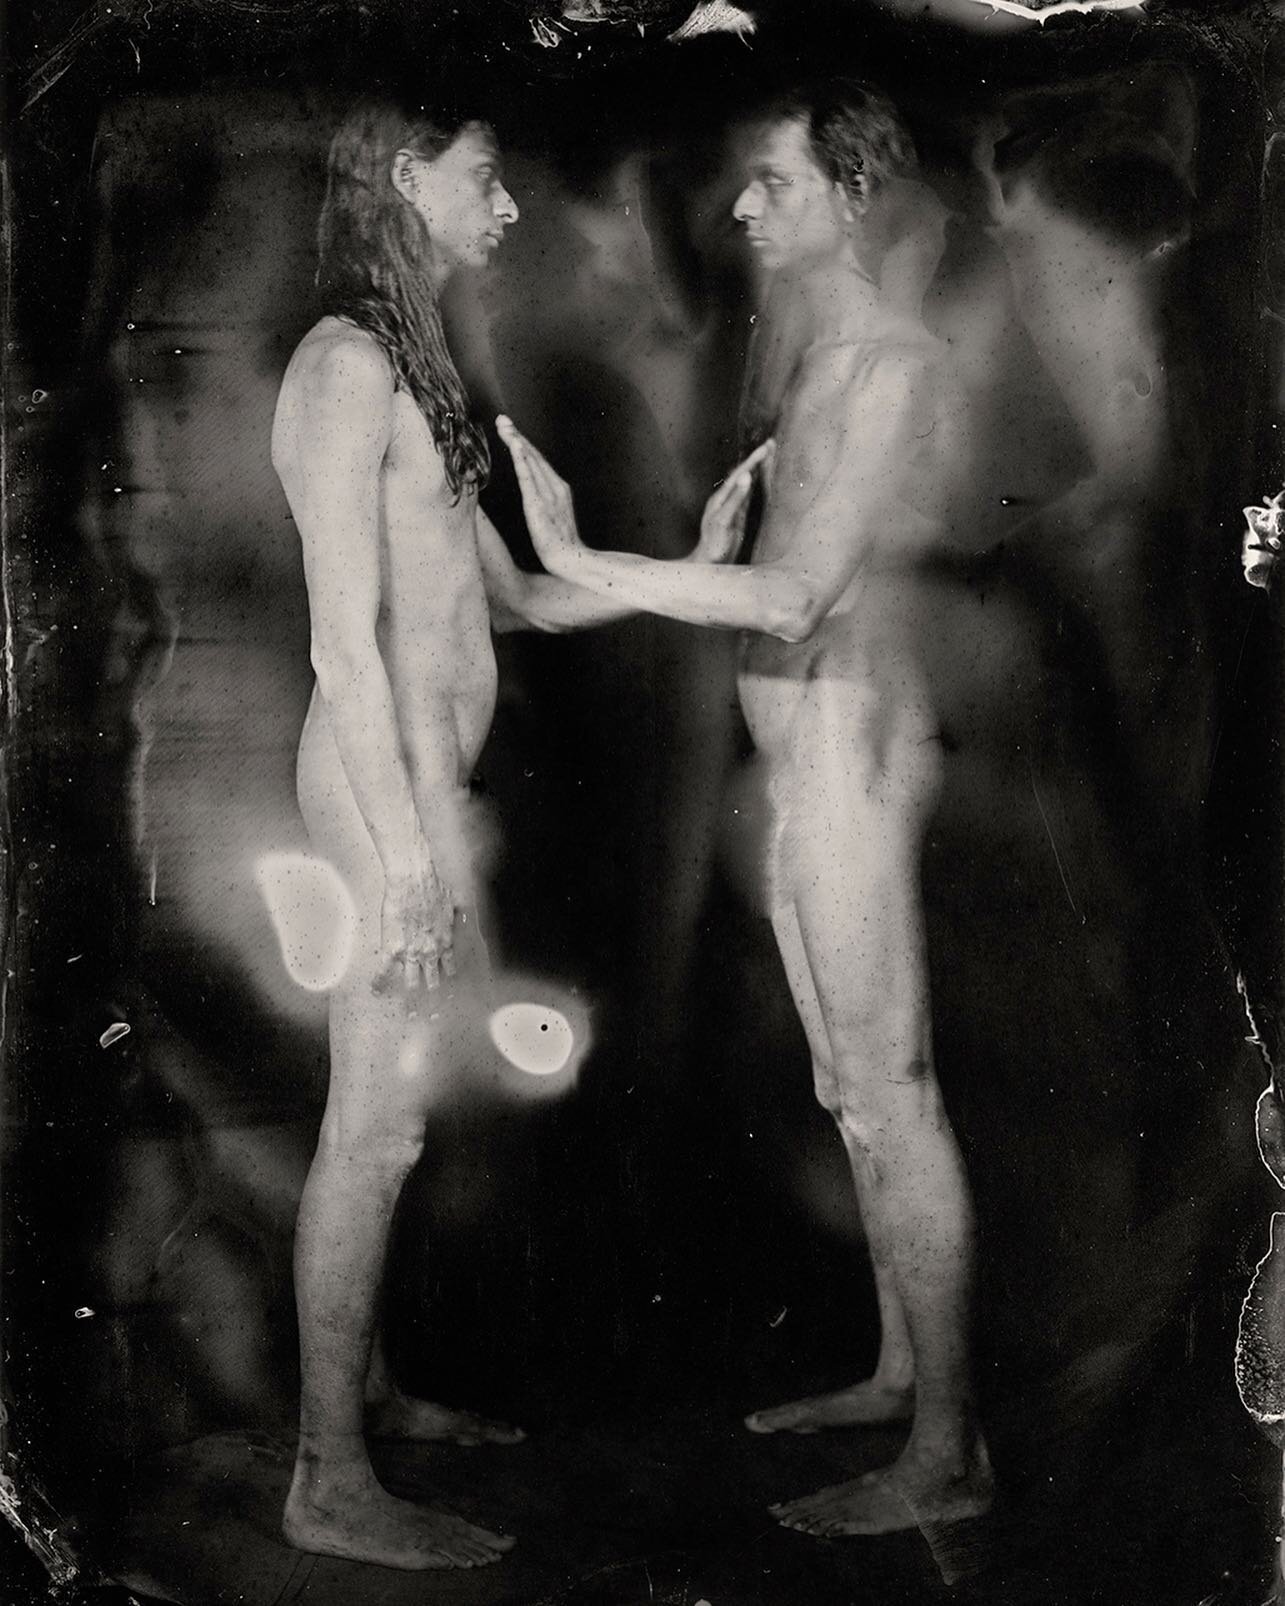 the passing from one body into another
&bull;
#wetplate #wetplatecollodion #collodion #tintype #experimentalphotography #alternativeprocess